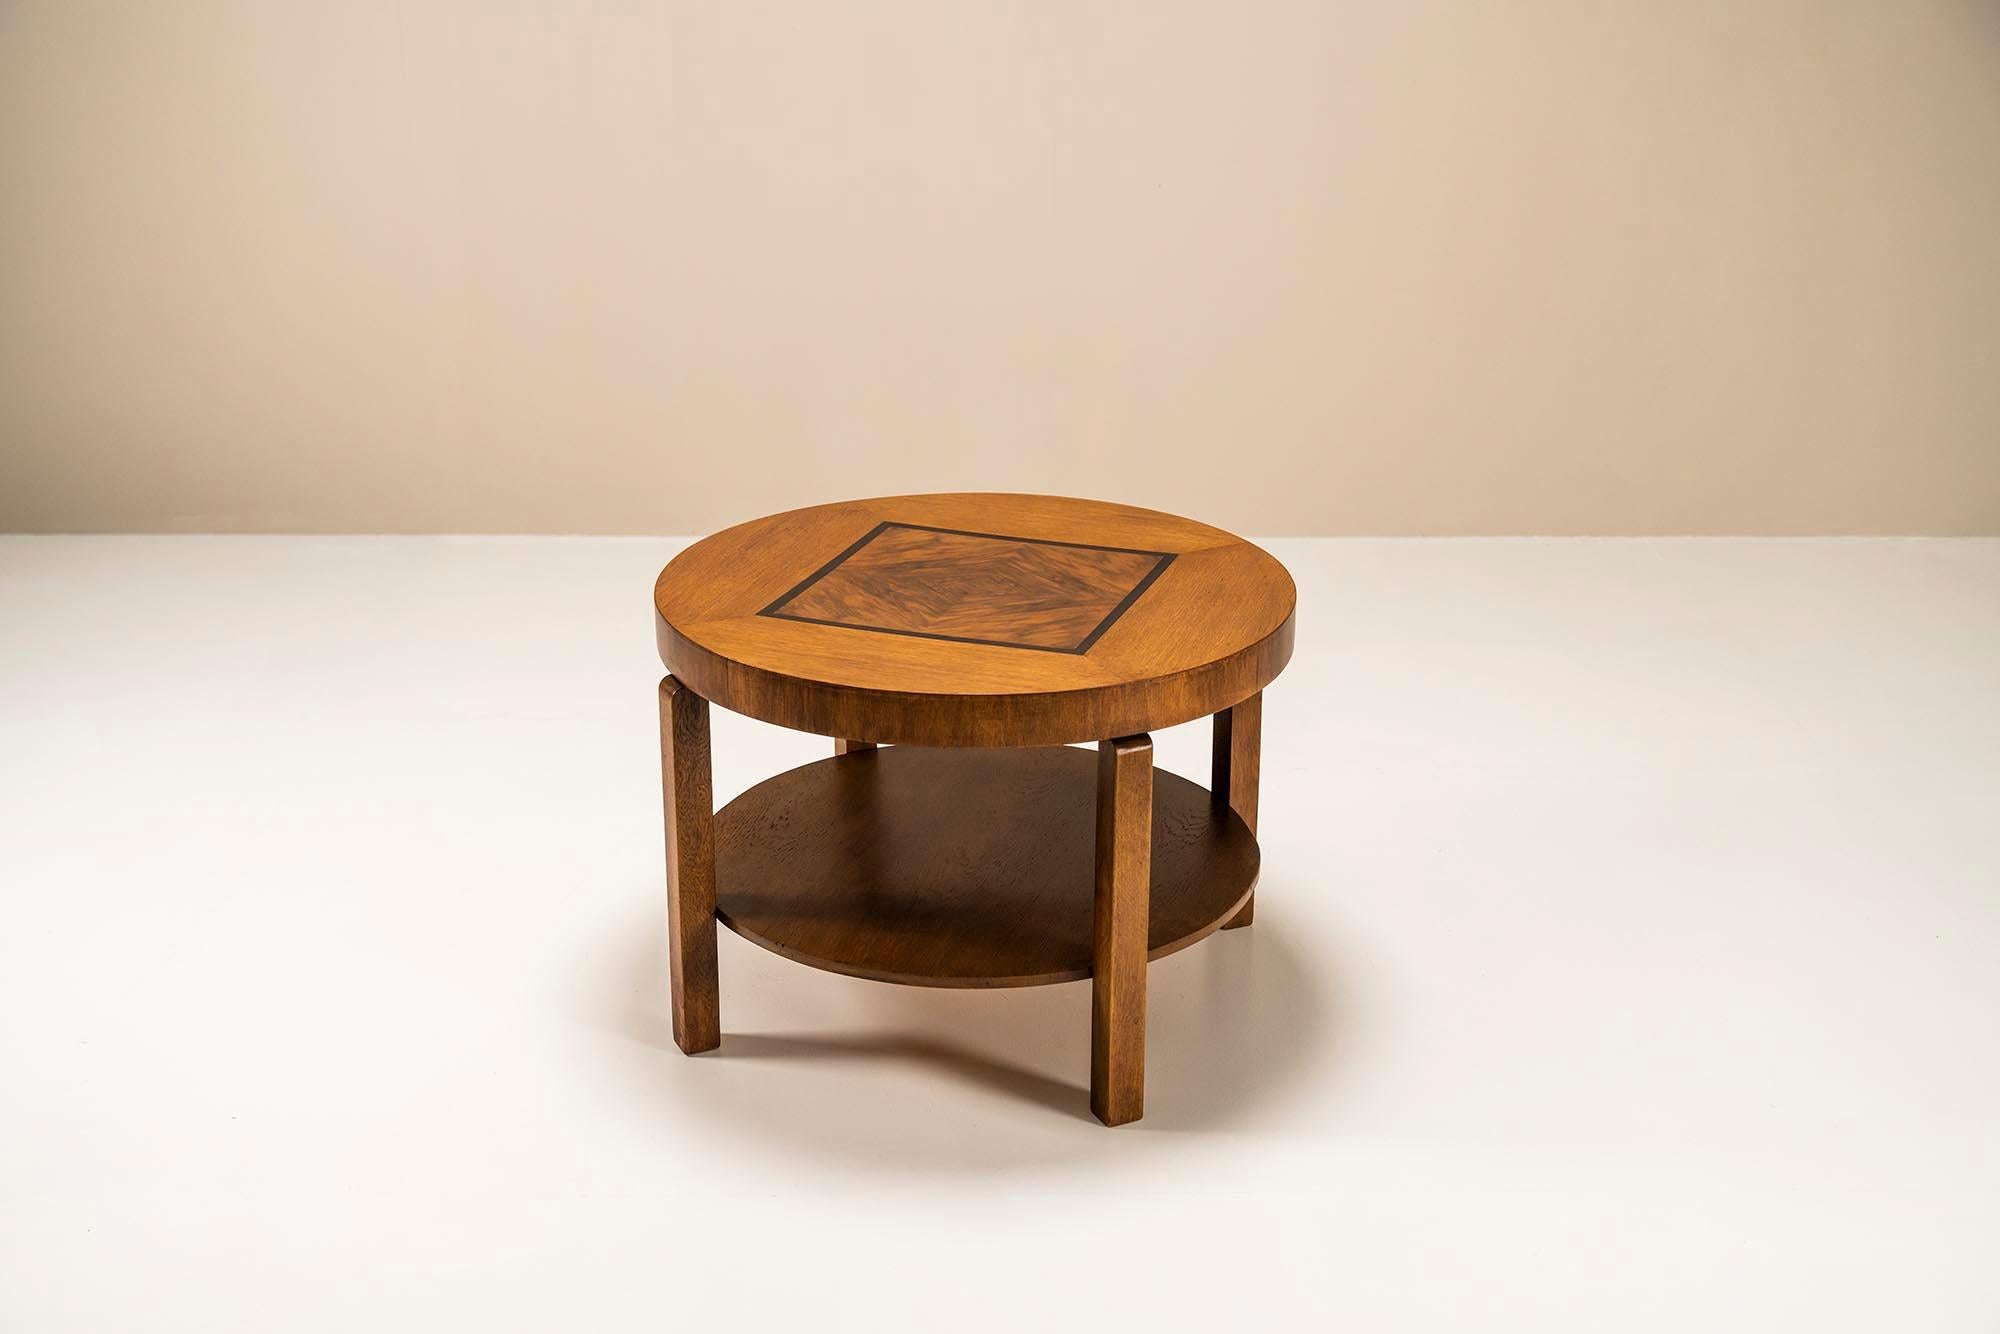 The Hague School round coffee in oak, walnut and ebony.  This coffee table has a calm and balanced appearance and is a beautiful example of the The Hague School. This is the counterpart of the Amsterdam School, which is characterized by fewer frills